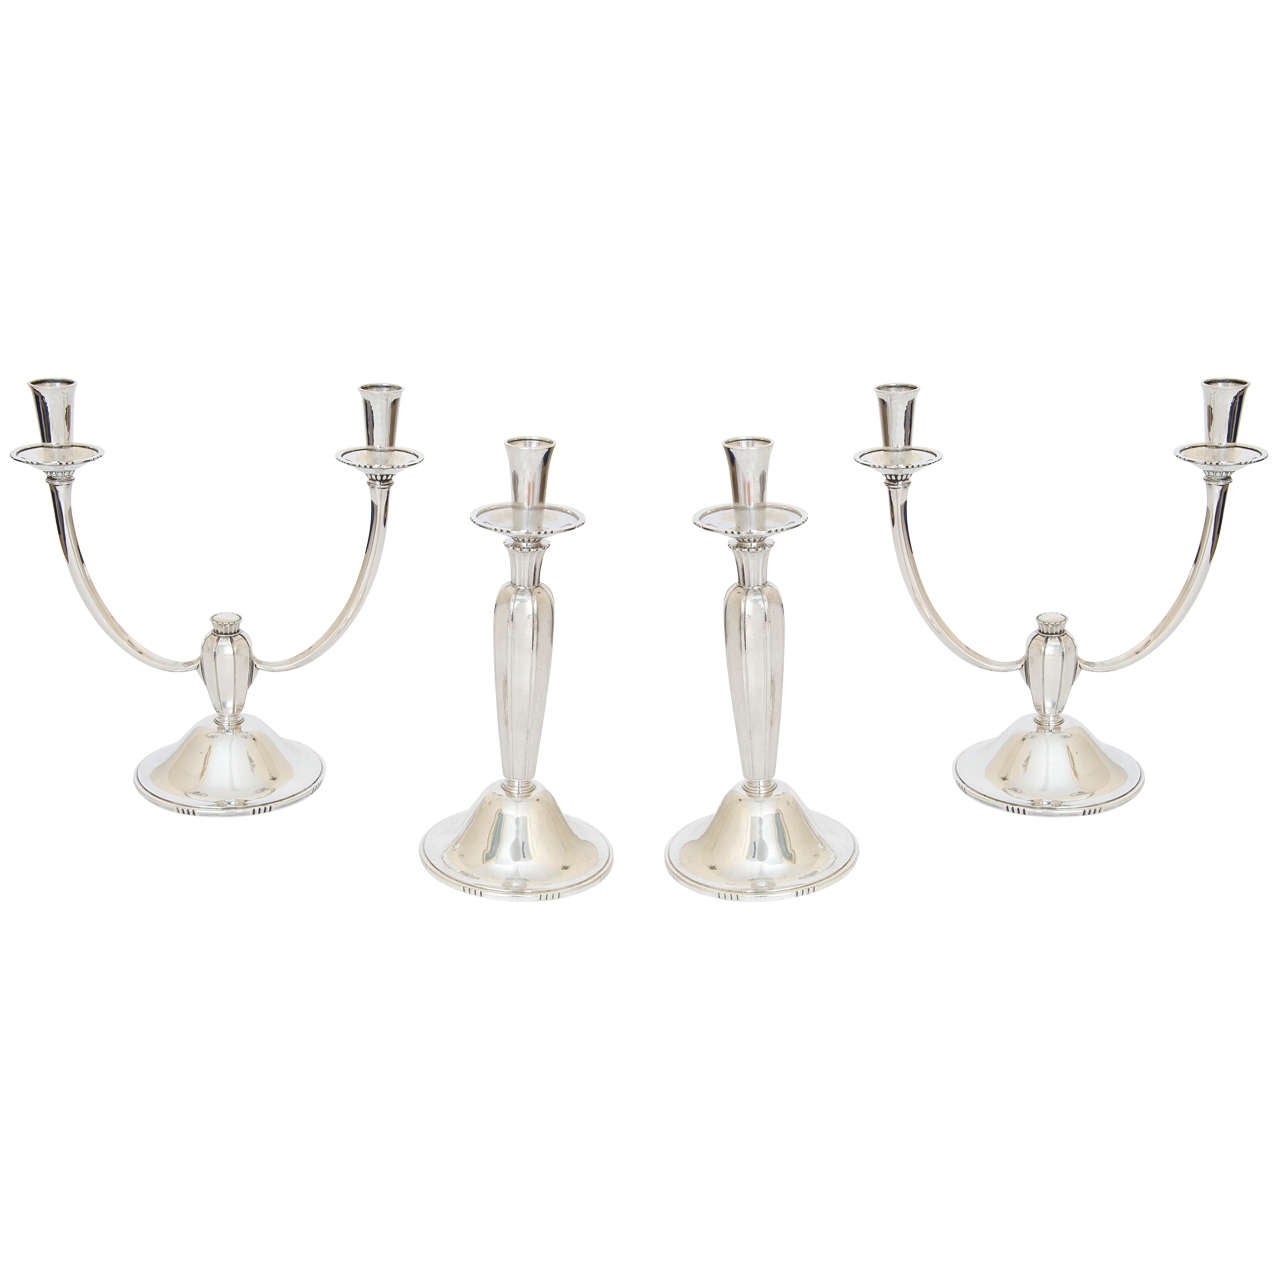 A rare and important Modernist candelabra suite comprising a pair of candlesticks and a pair of candelabra. The suite was made by the renowned silversmith Robert Edgar Stone (1903-1990) and retailed by the Royal Goldsmith & Silversmith, Garrard &